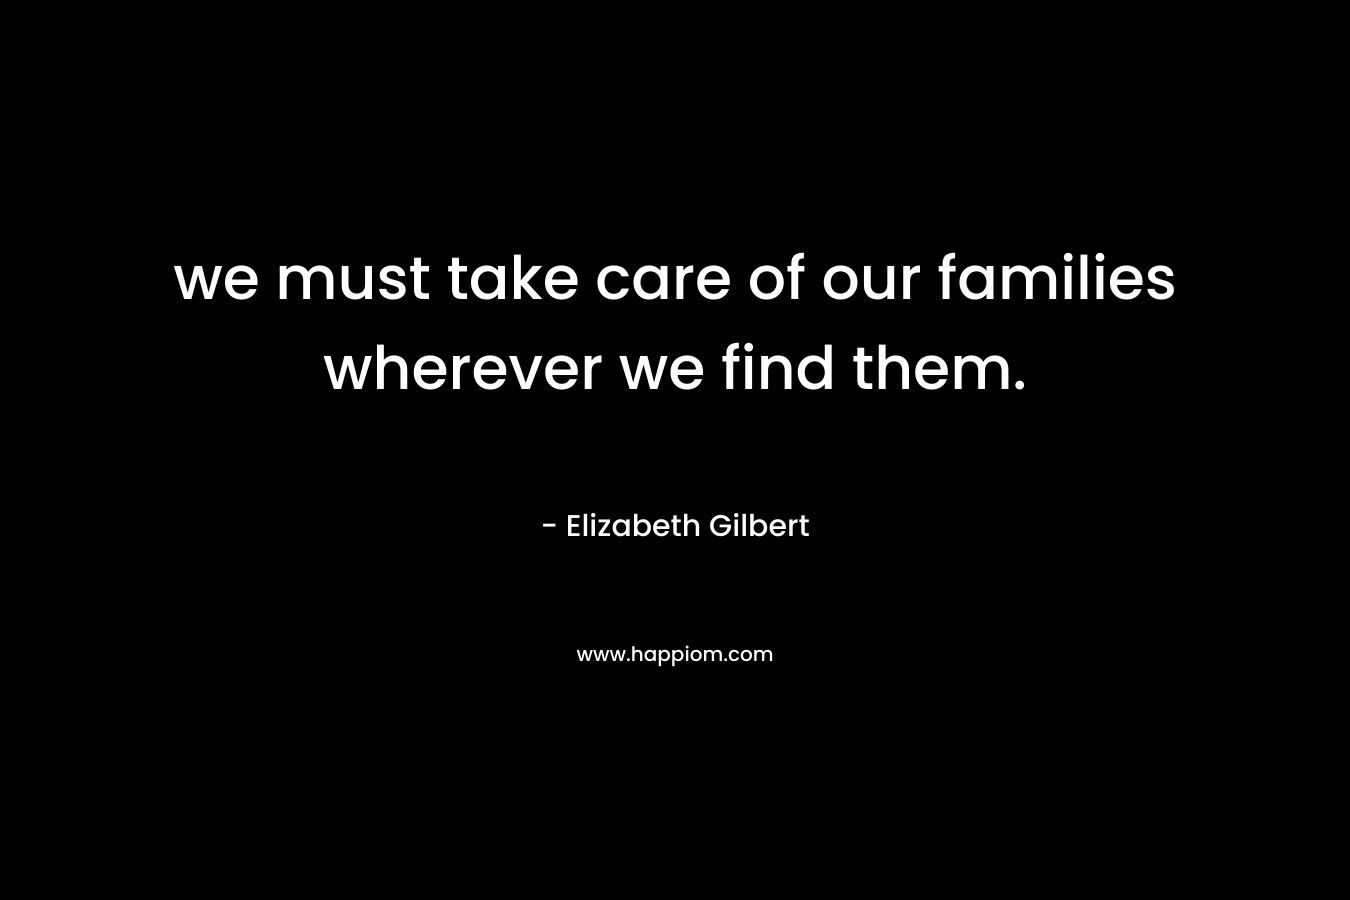 we must take care of our families wherever we find them.